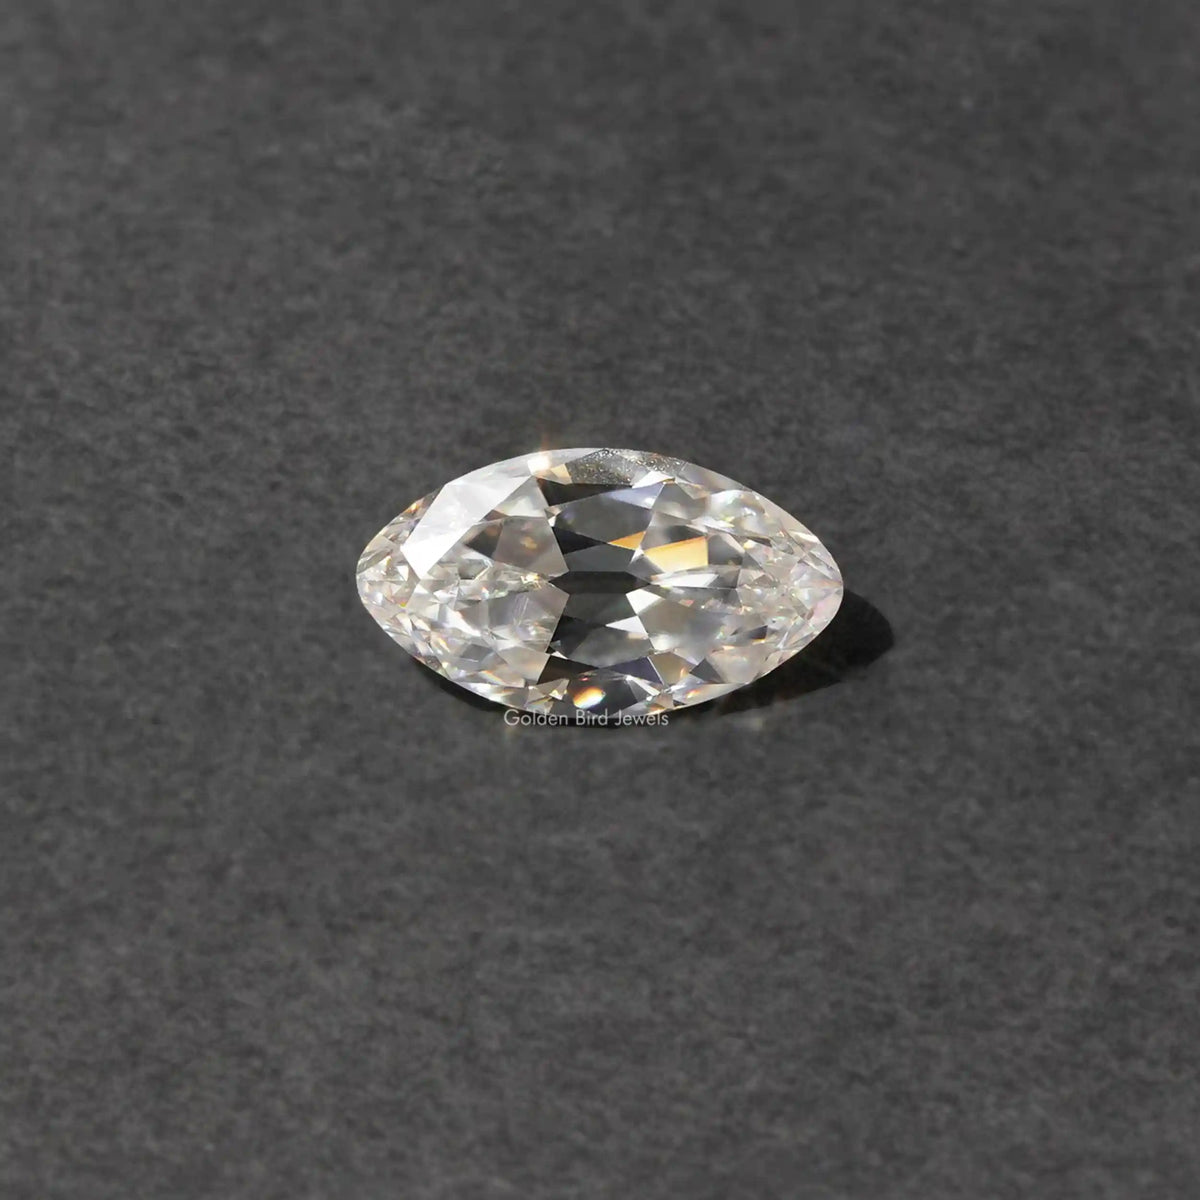 [Front view of old mine moval cut loose moissanite]-[Golden Bird Jewels]